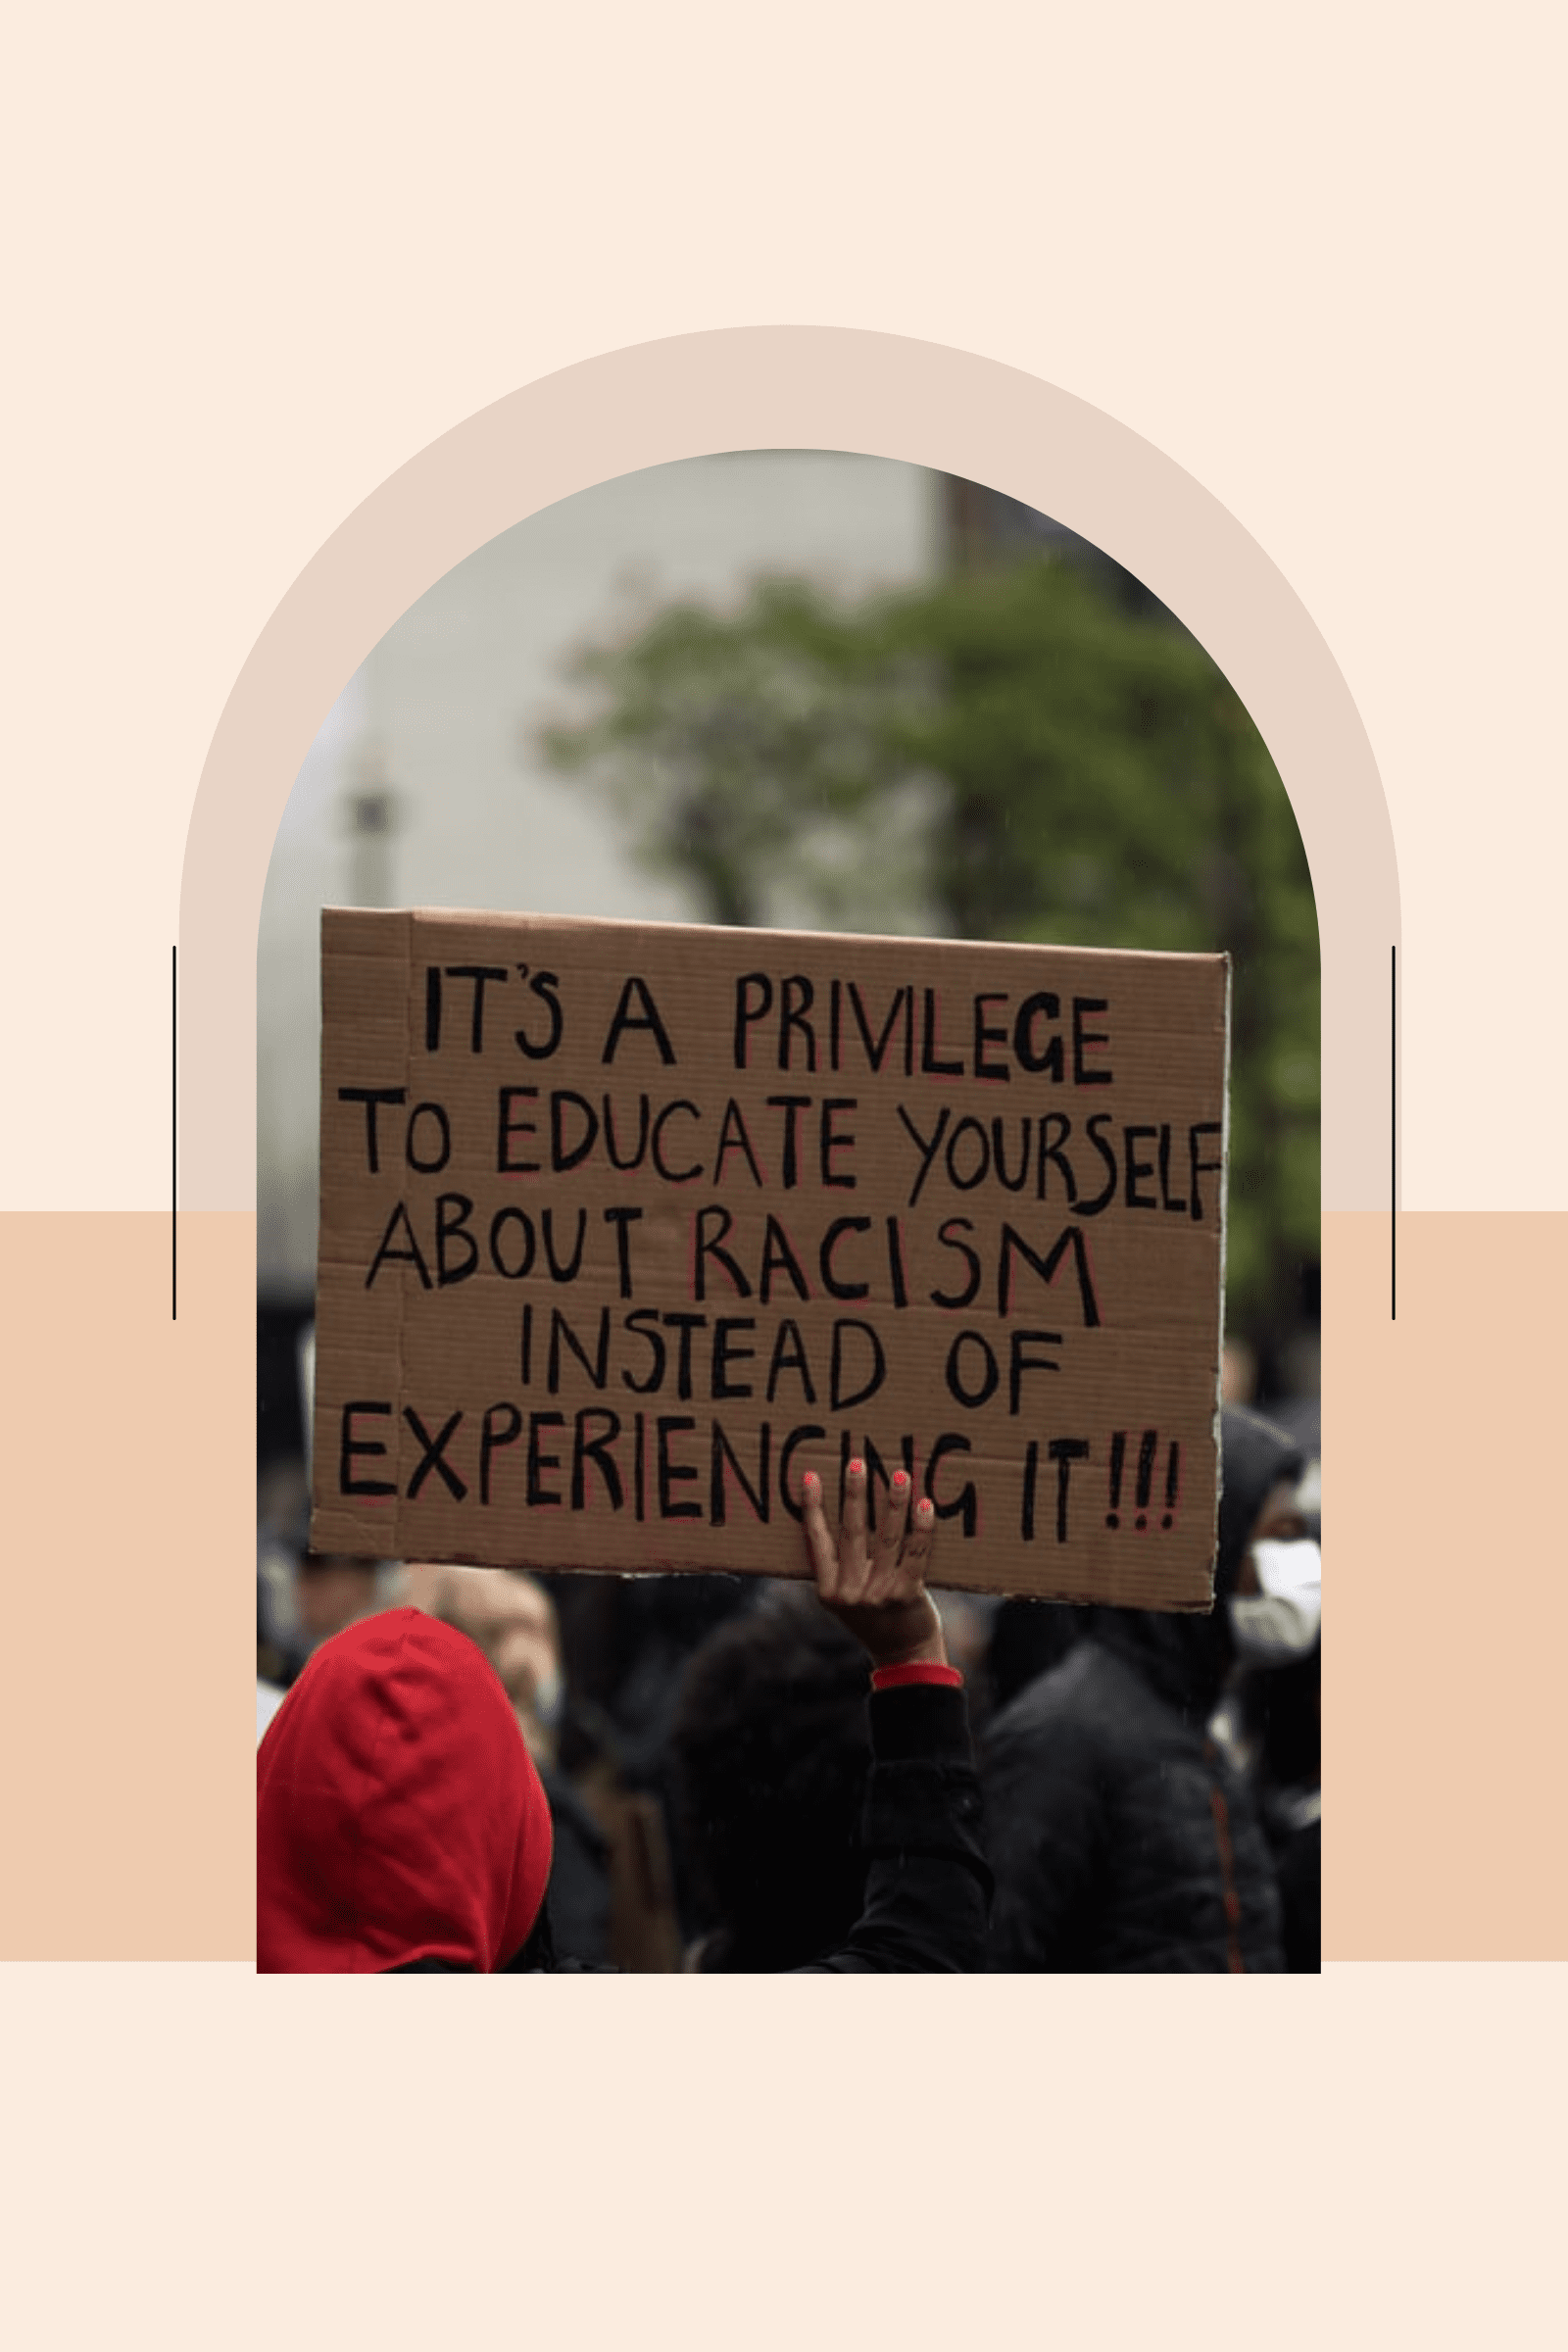 peach background with half arch moon and an image of a cardboard sign being held up by a black hand with the words "It's a privilege to educate yourself about racism instead of experiencing it" written on the sign in black marker